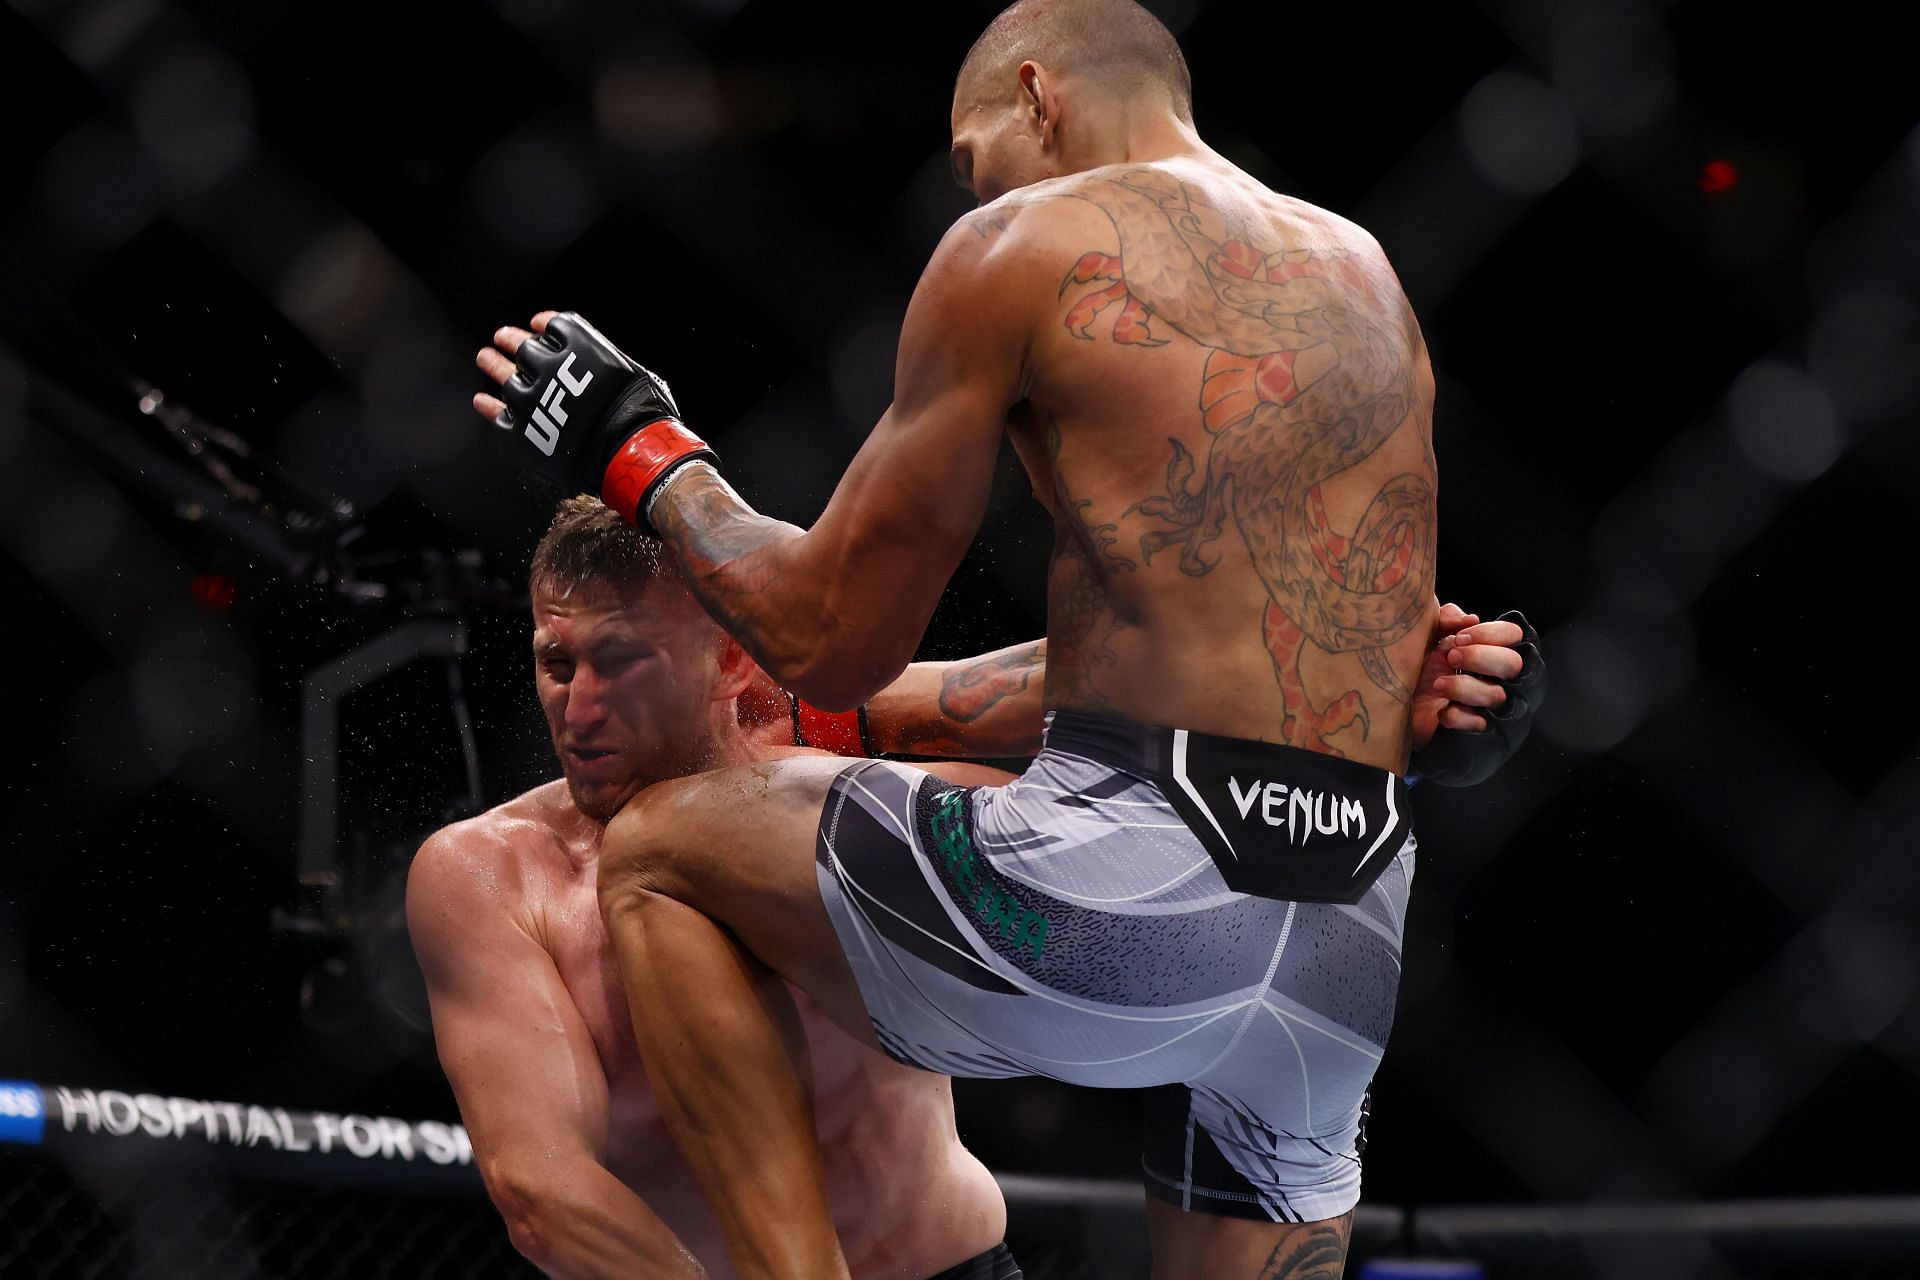 Alex Pereira debuted in the UFC in style with a violent flying knee